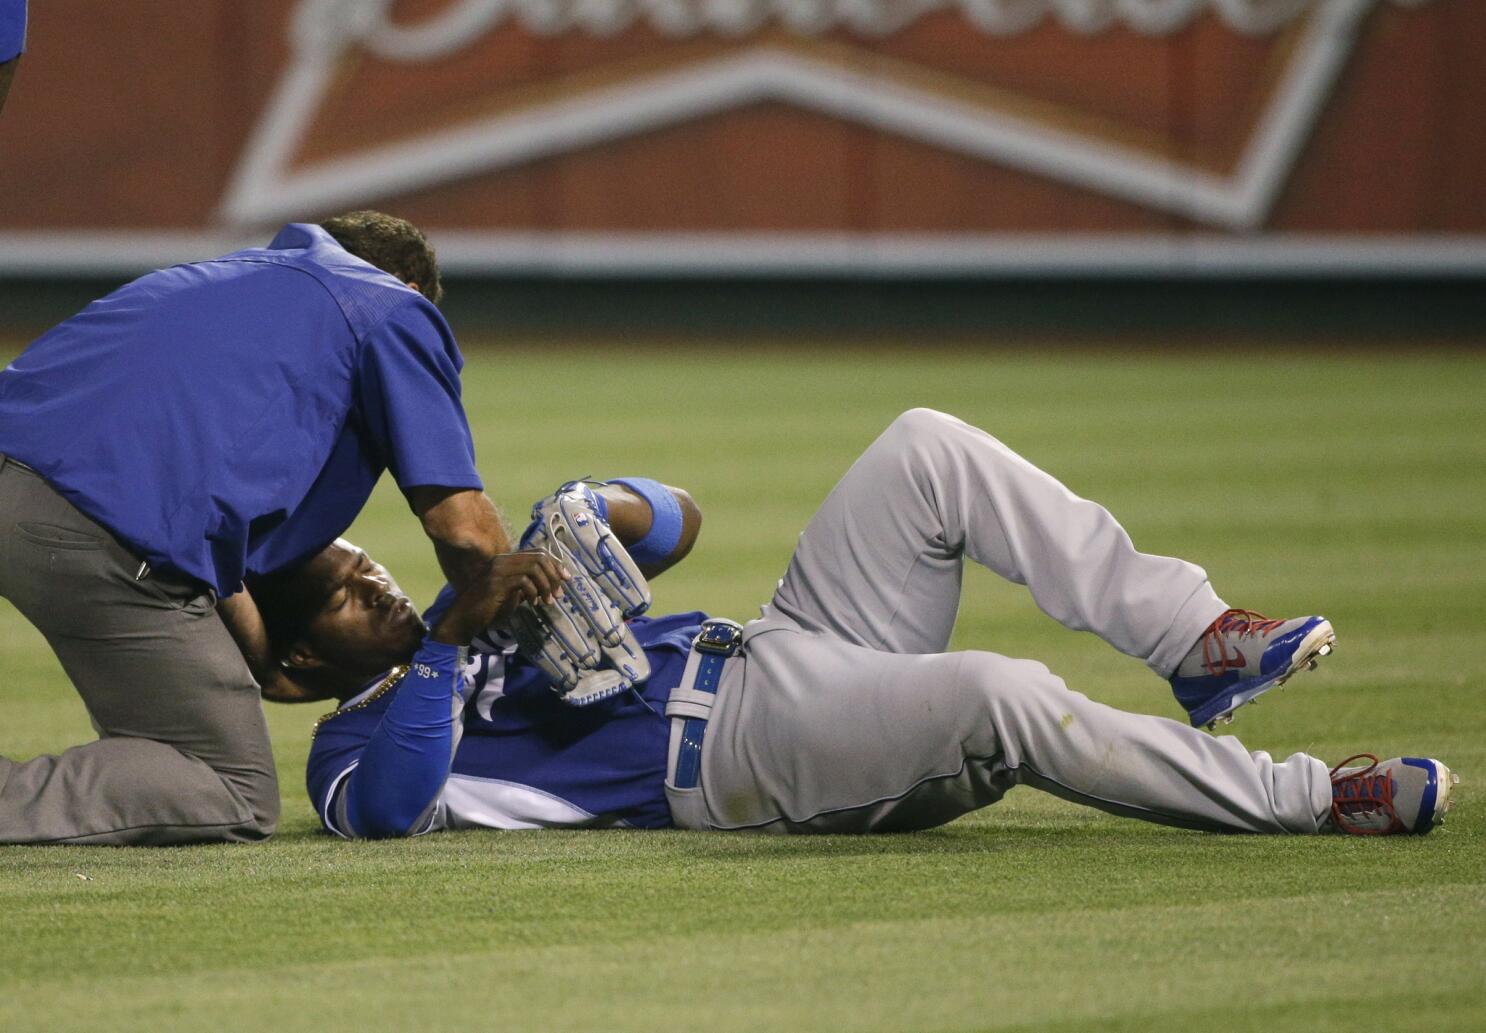 Dodgers OF Ethier leaves after getting hit on elbow